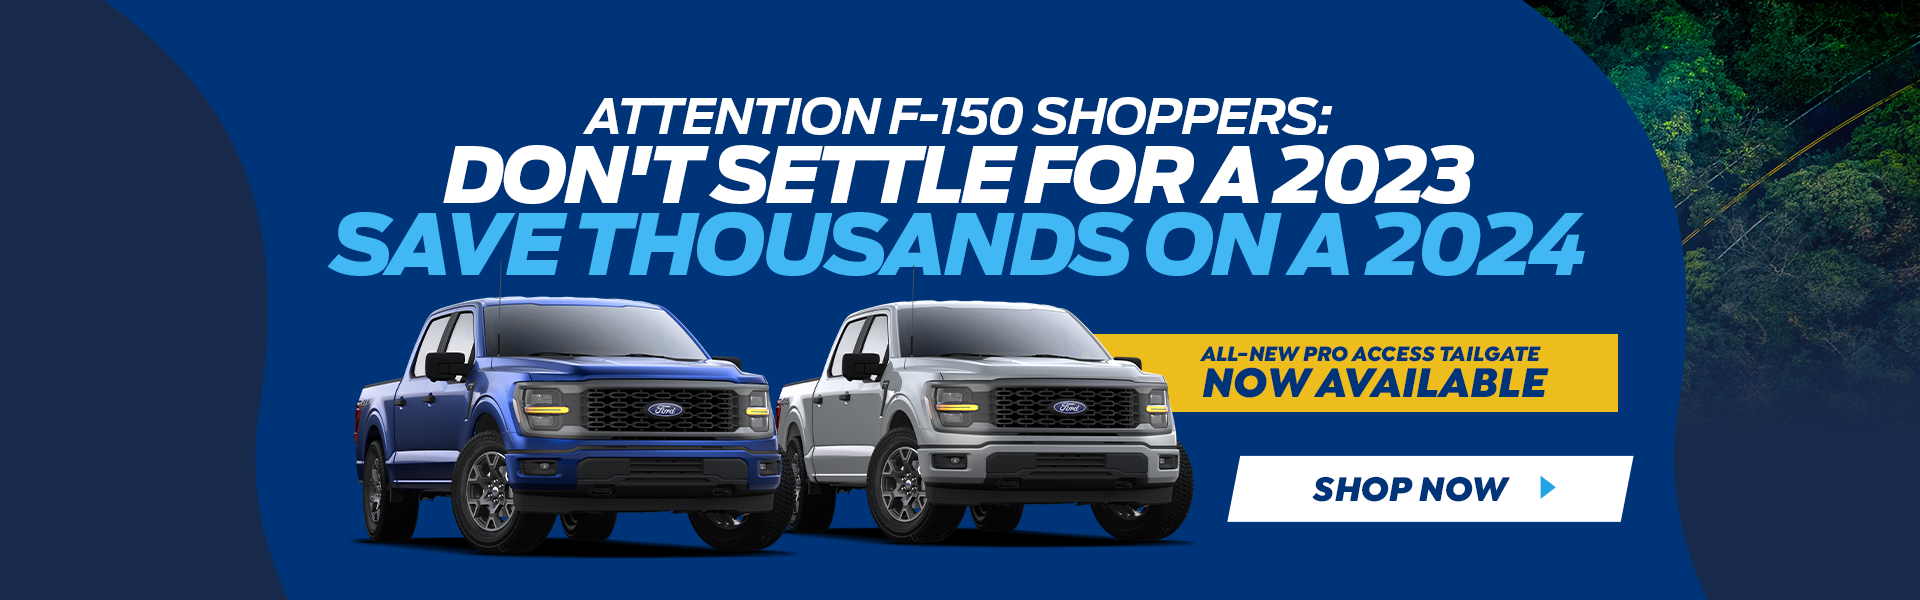 Don't Settle for a 2023; Save Thousands on a 2024 F-150!